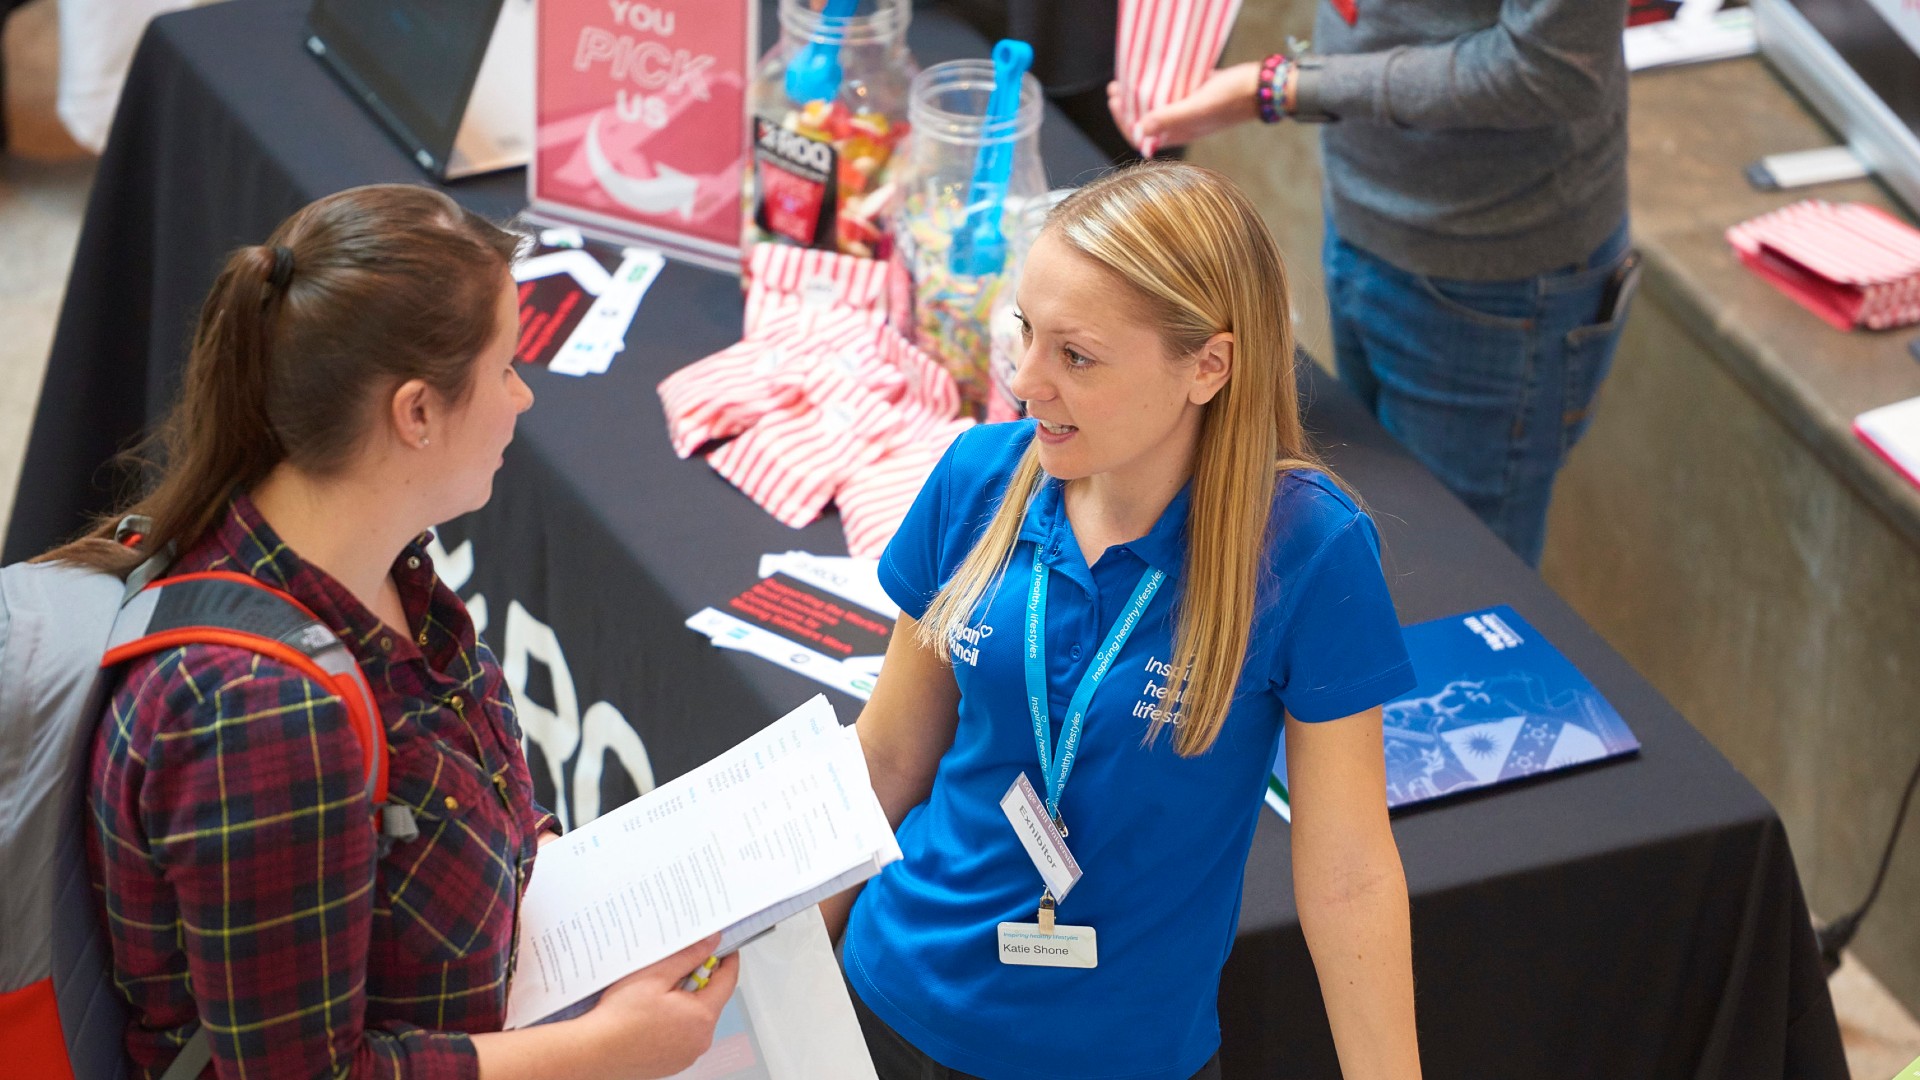 Two people are stood next to a table at a careers fair. 